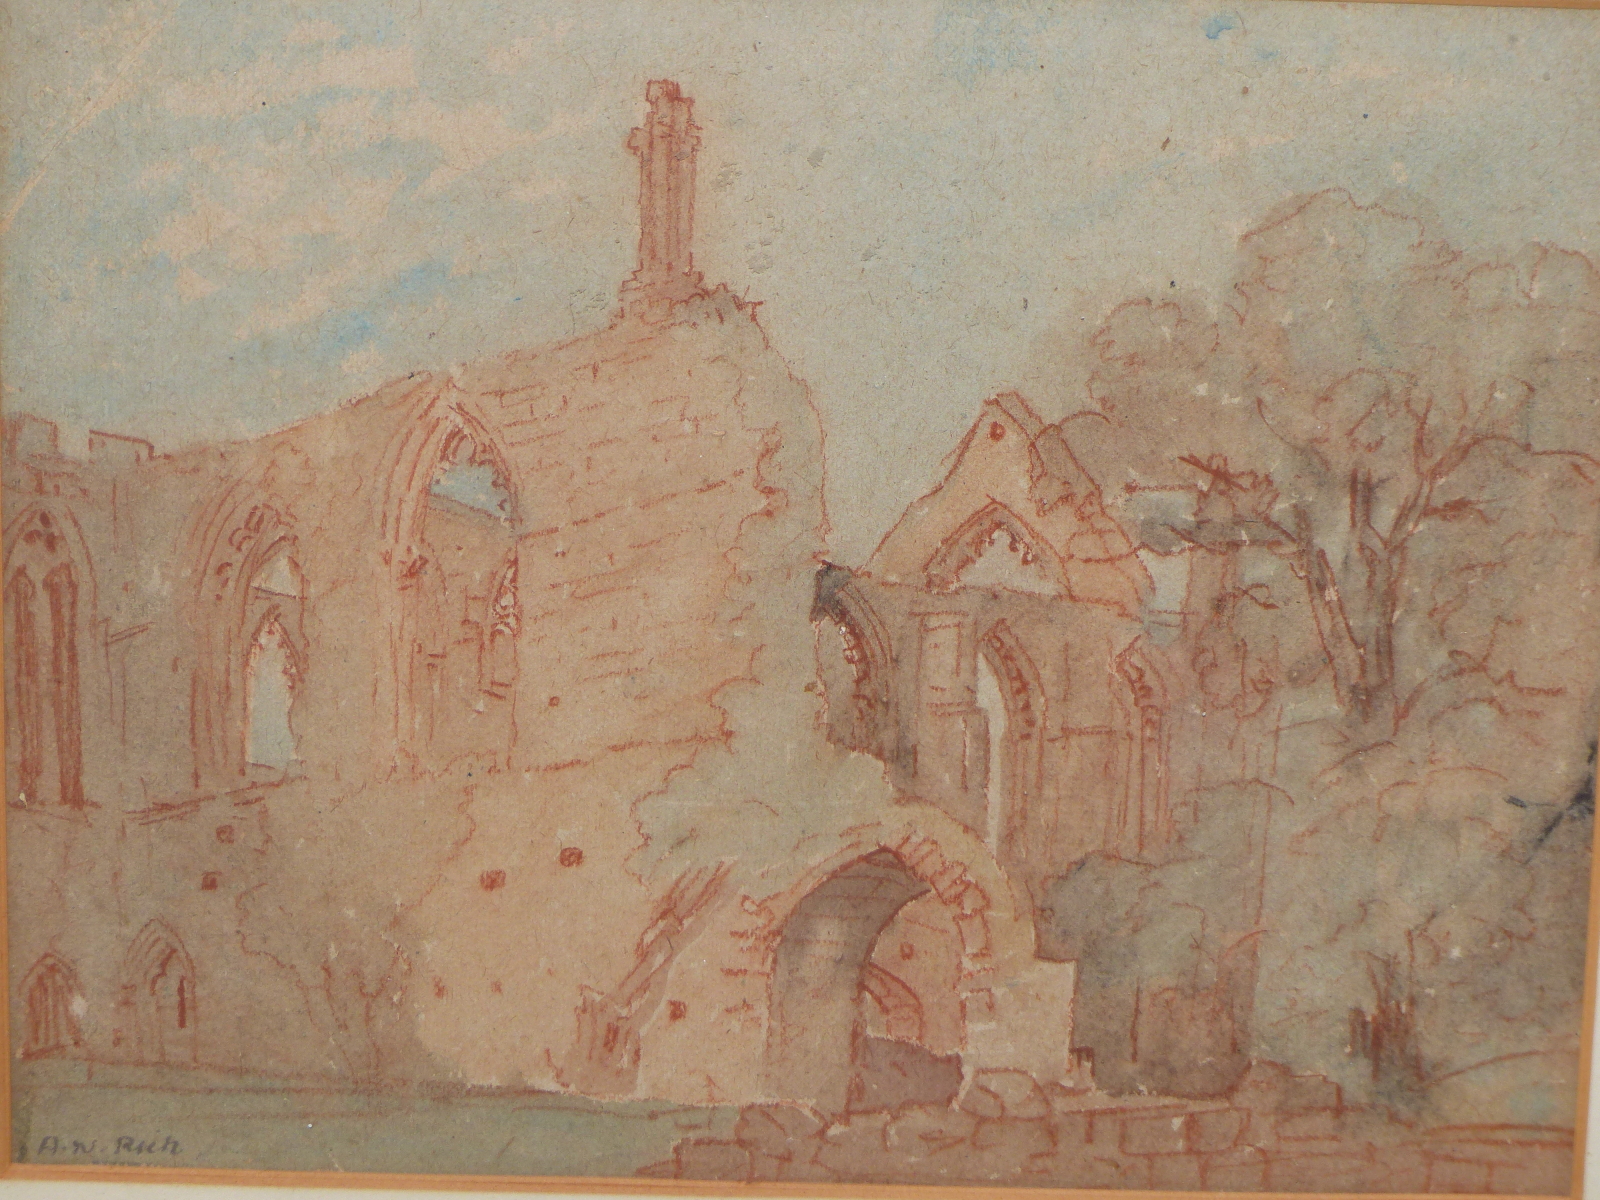 A.N. RICH, ABBEY RUINS, SIGNED, RED CHALK AND WASH, 28 X 23cms. - Image 5 of 8